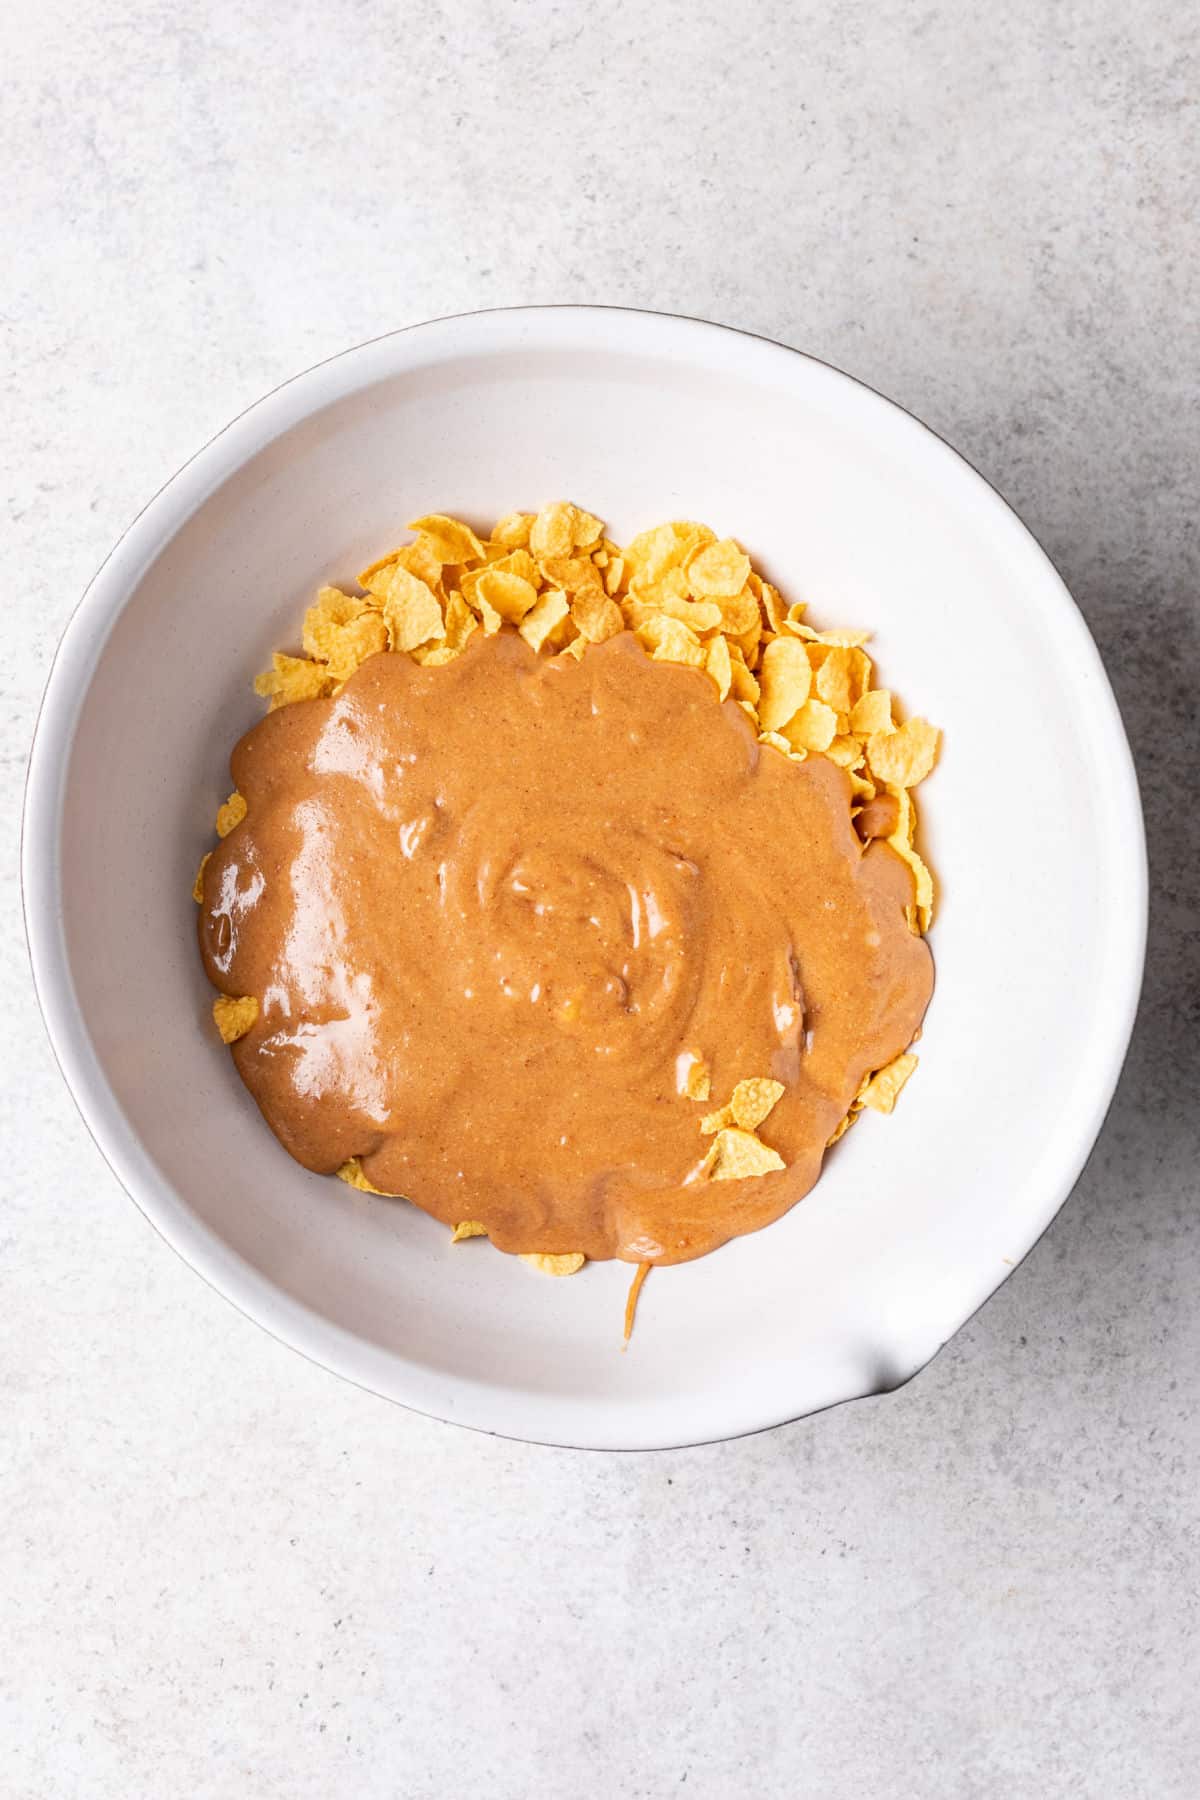 Peanut butter mixture on cornflakes in a mixing bowl. 